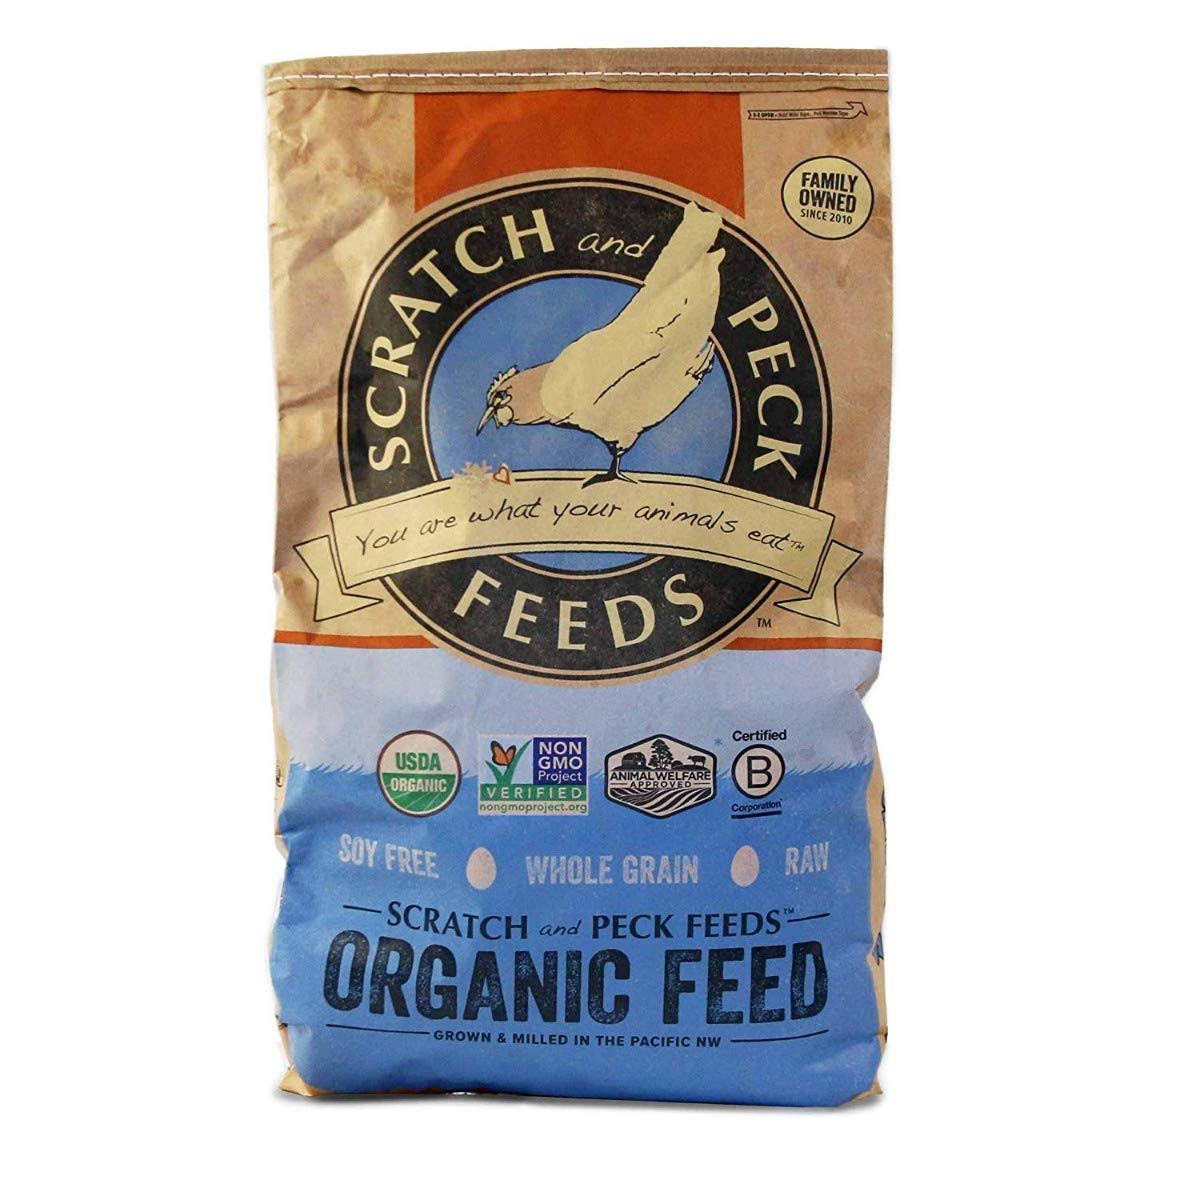 Scratch and Peck Feeds Organic Layer with Corn 16% Poultry Feed, 40-lb Bag